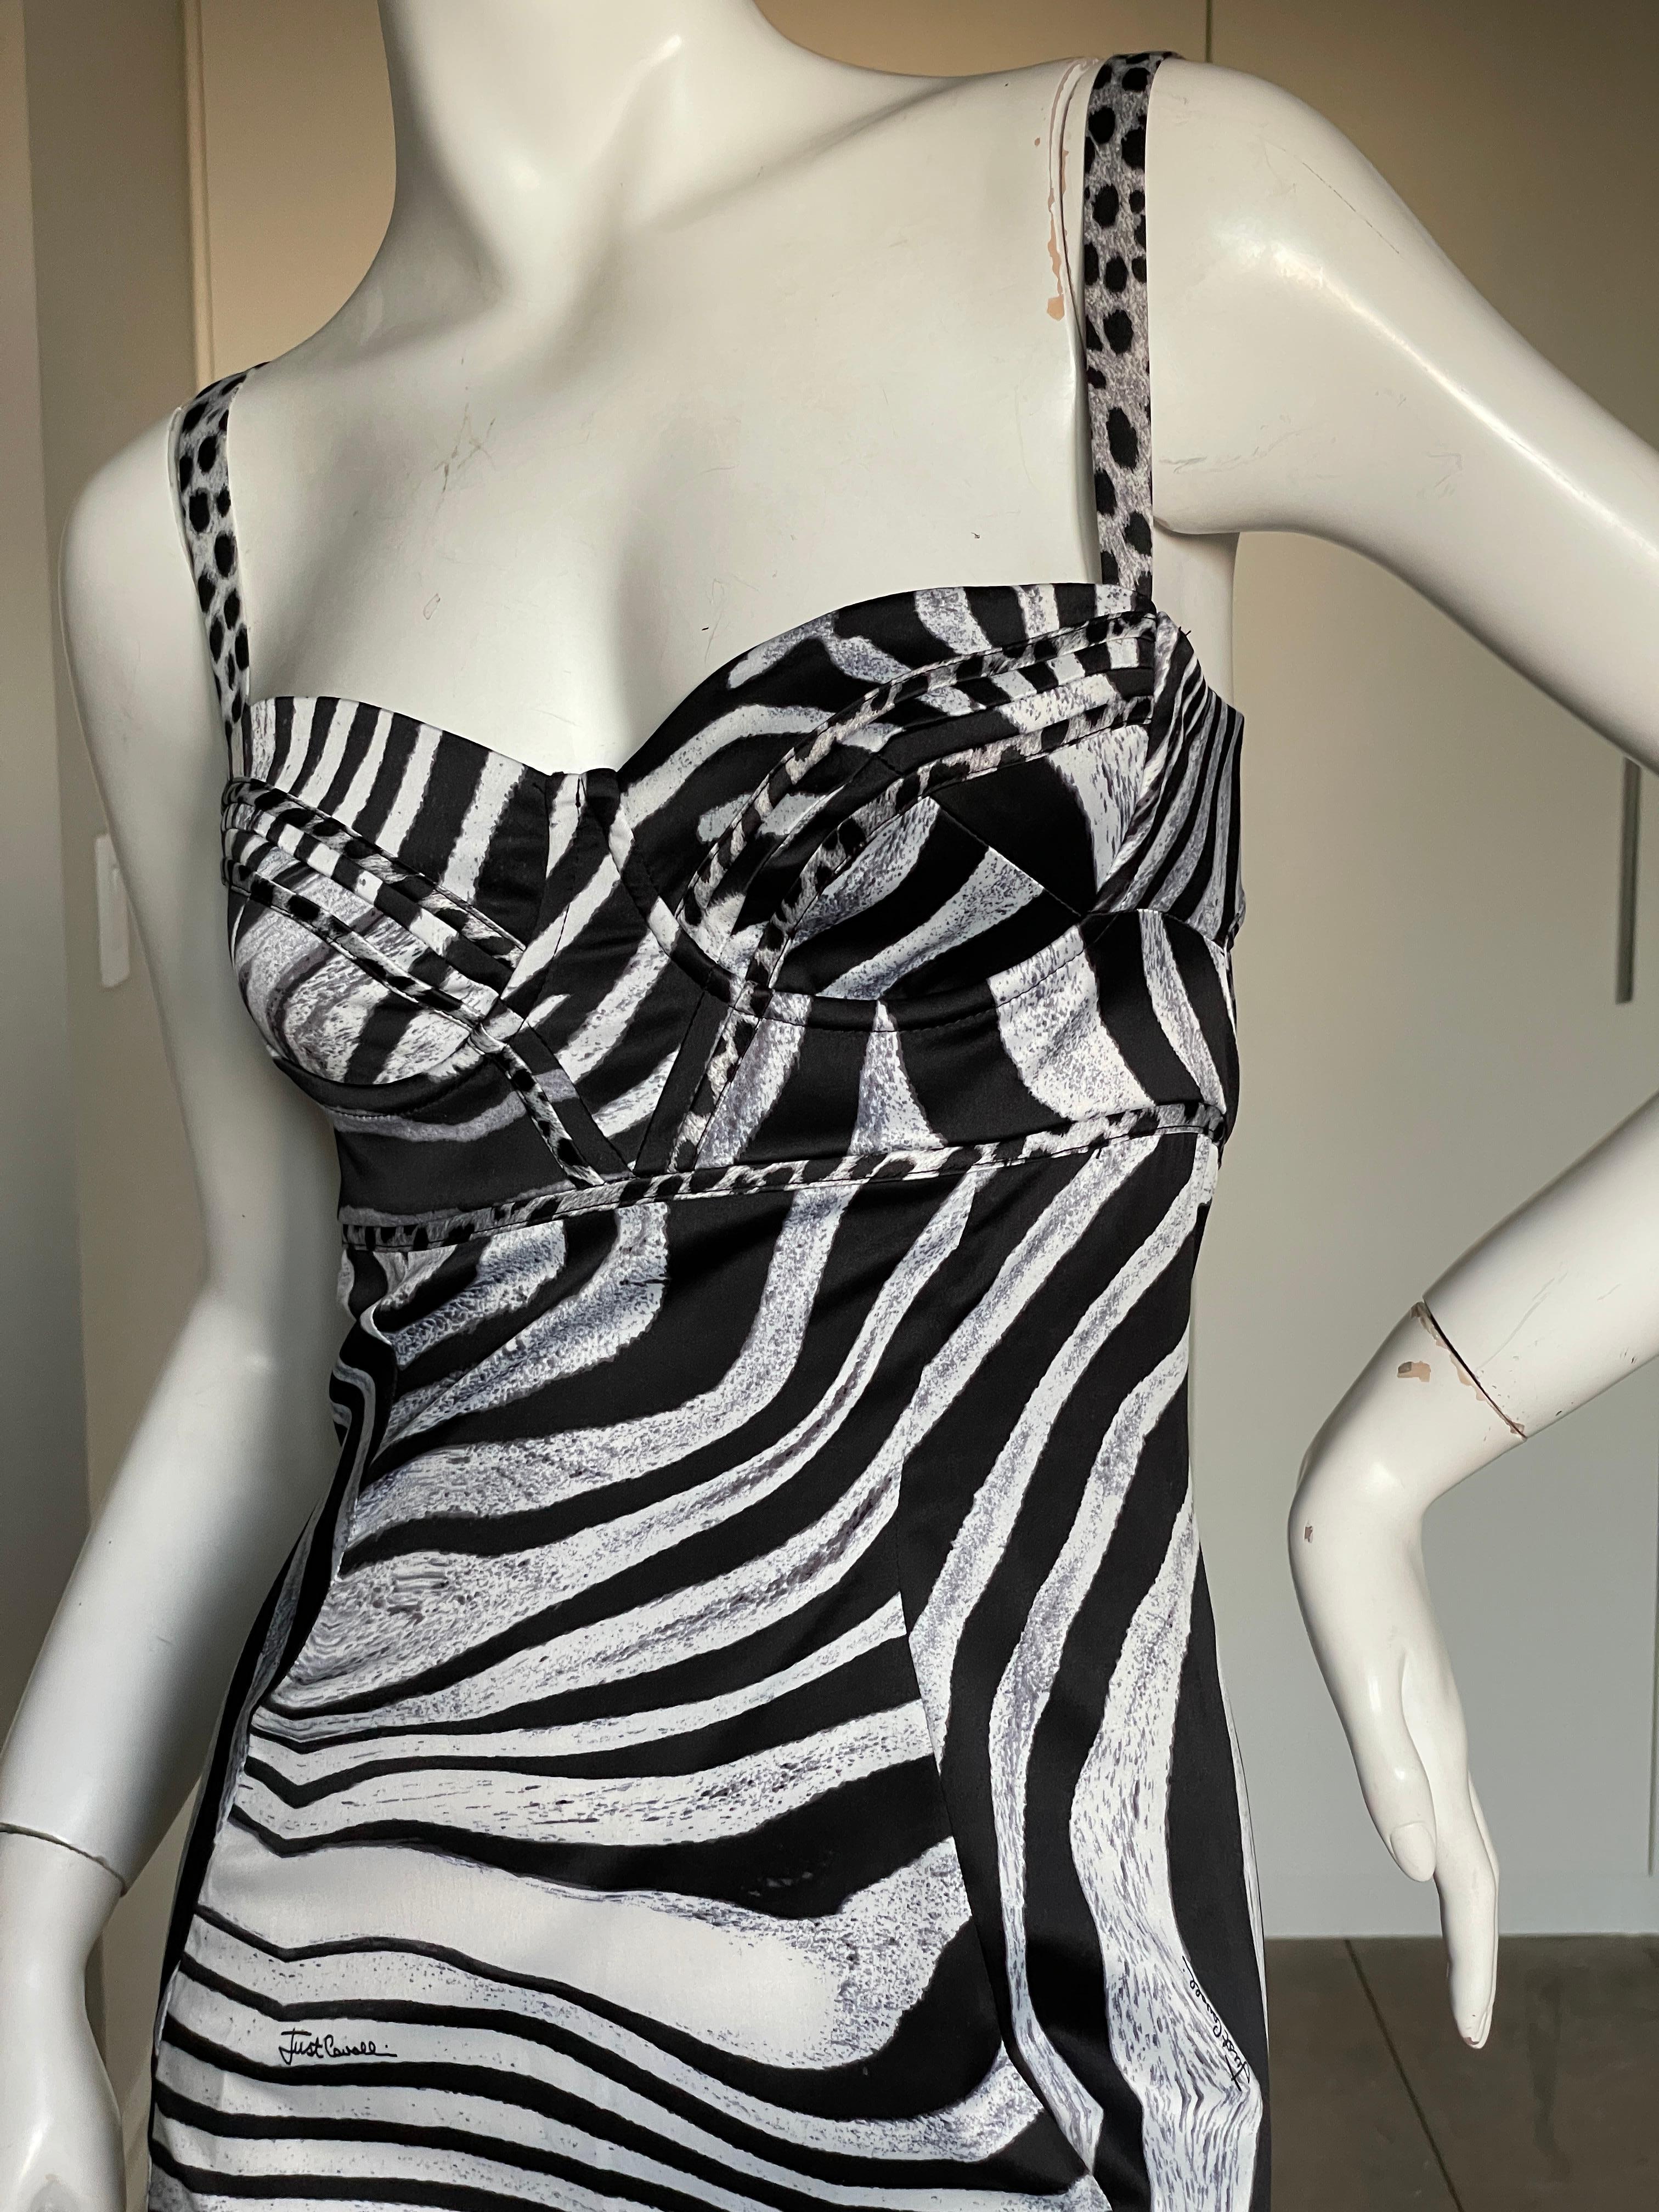 Just Cavalli Vintage Zebra Print Mermaid Dress with Sexy Back and Train  In Excellent Condition For Sale In Cloverdale, CA